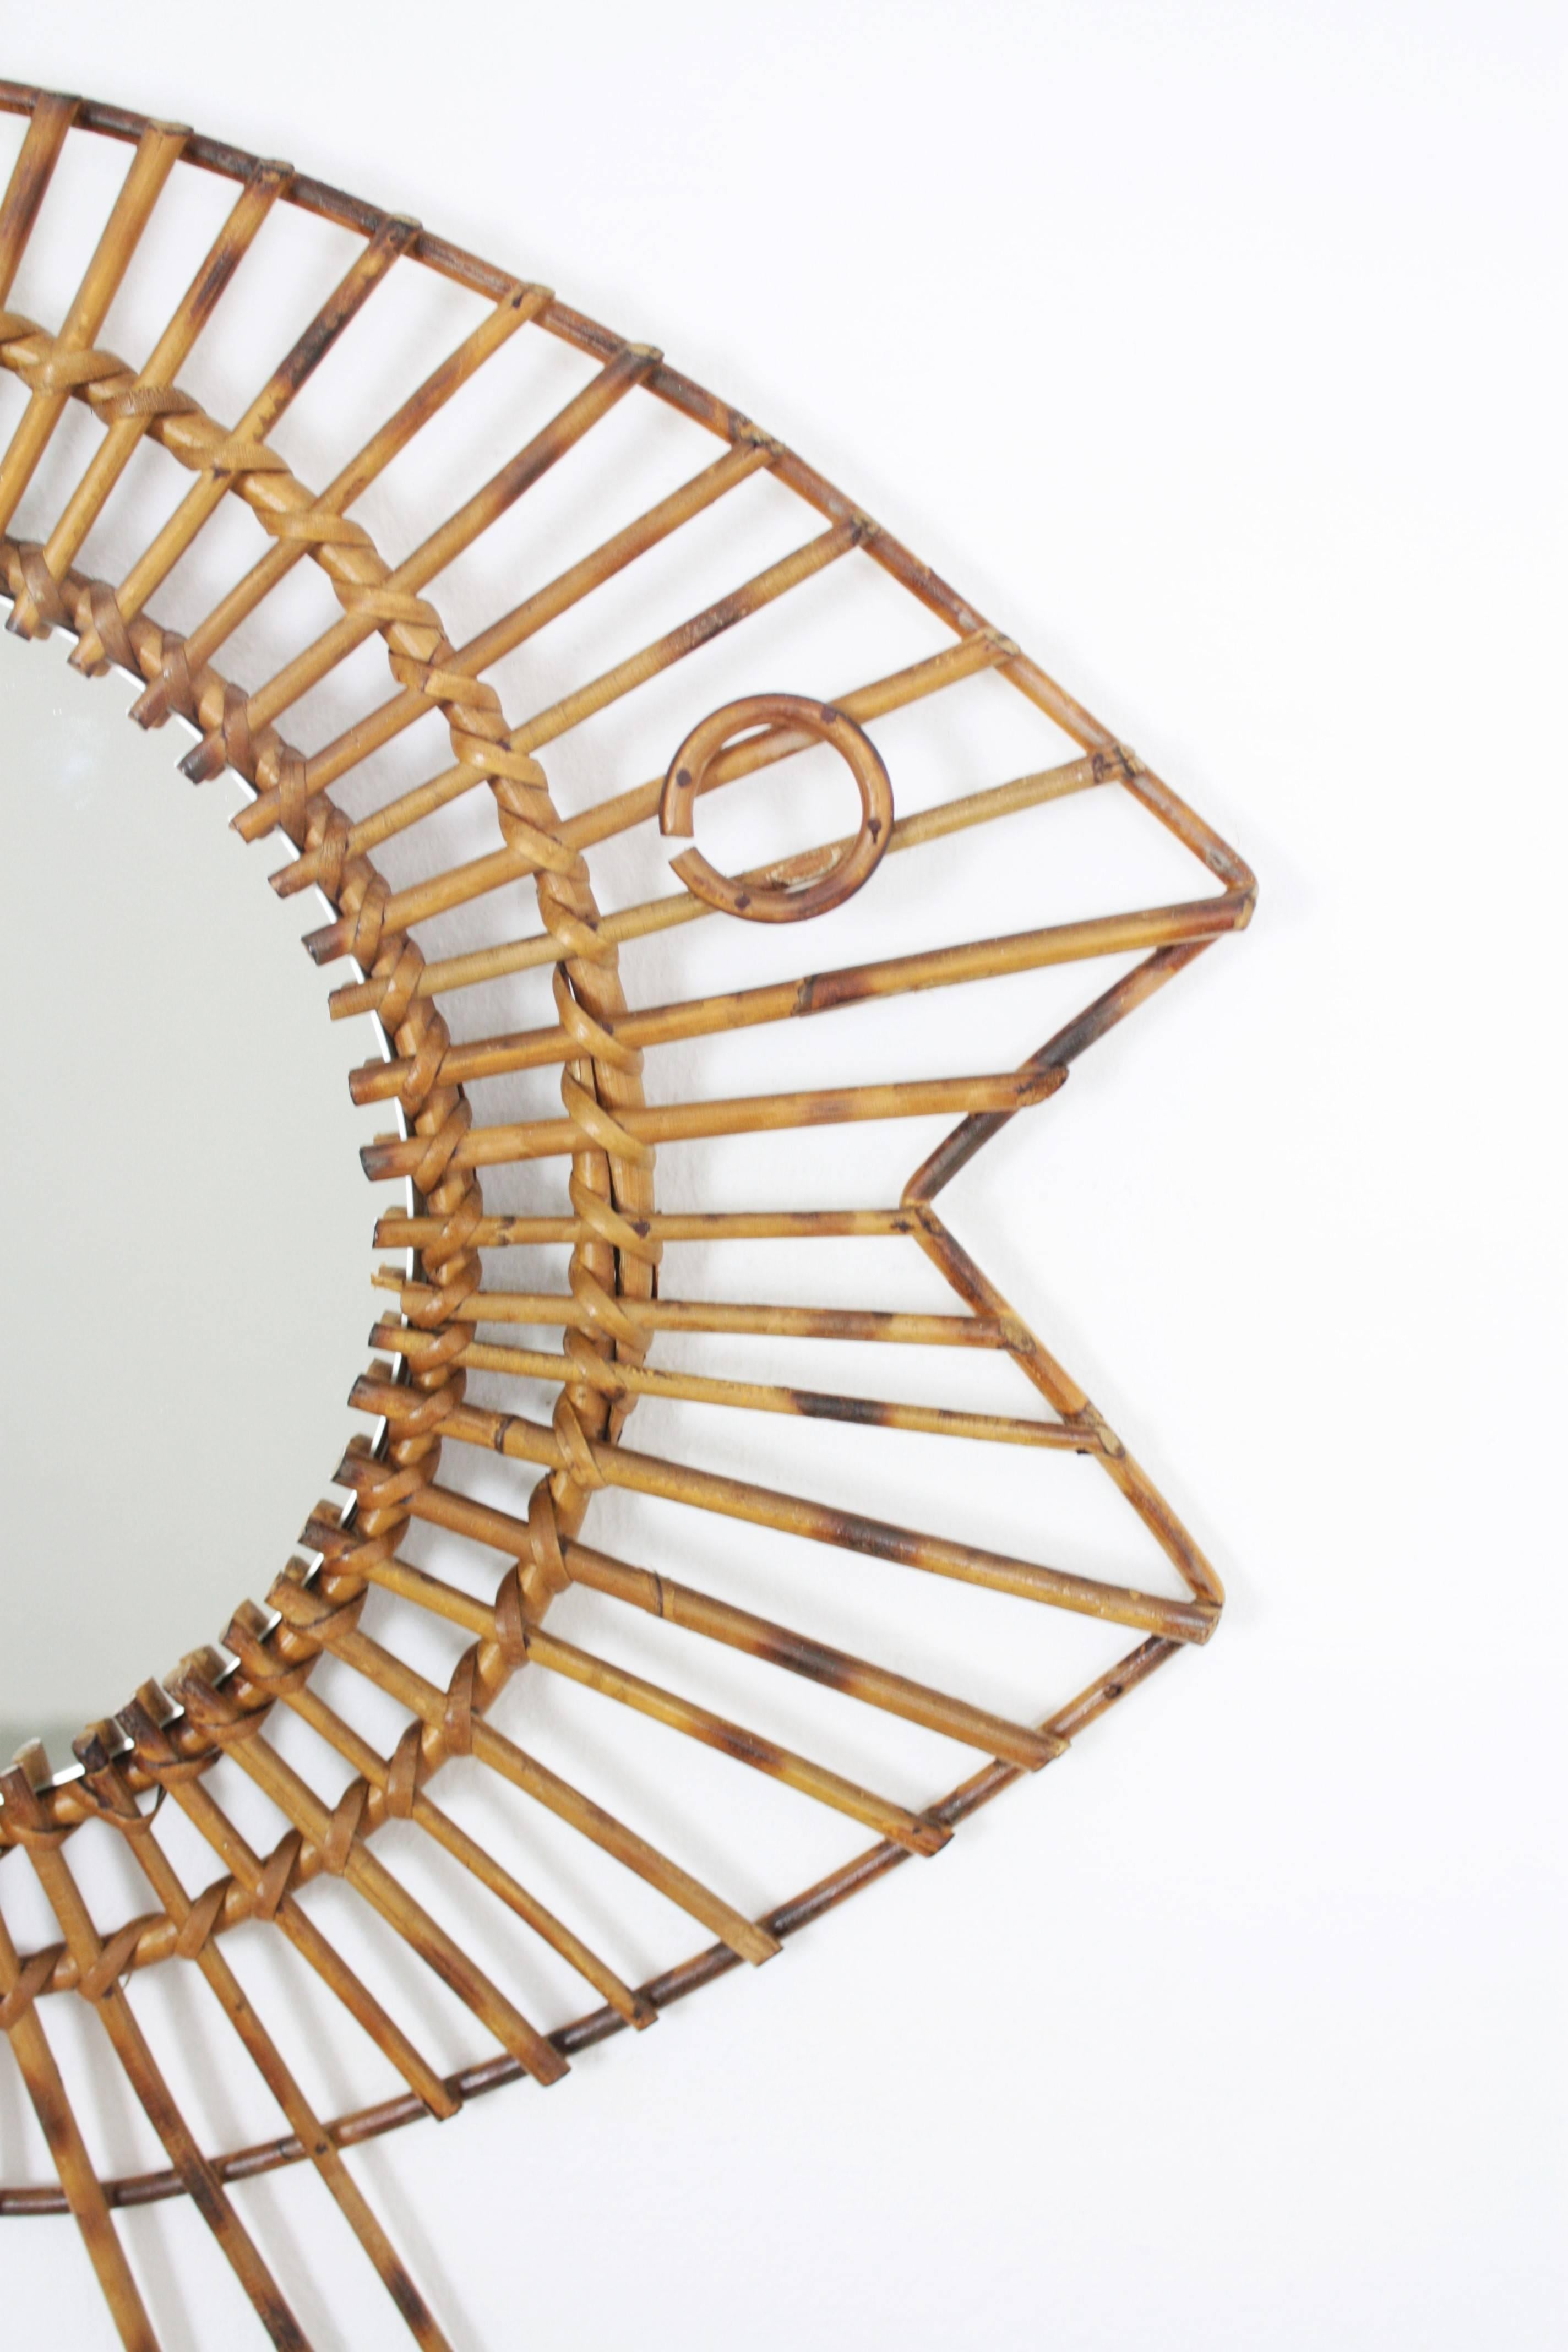 Unusual 1950s French rattan or wicker mirror handcrafted with fish shape and oriental accents. This spectacular piece combines accents from the French Riviera style and oriental accents.
Excellent vintage condition.
France, 1950s.
Dimensions of